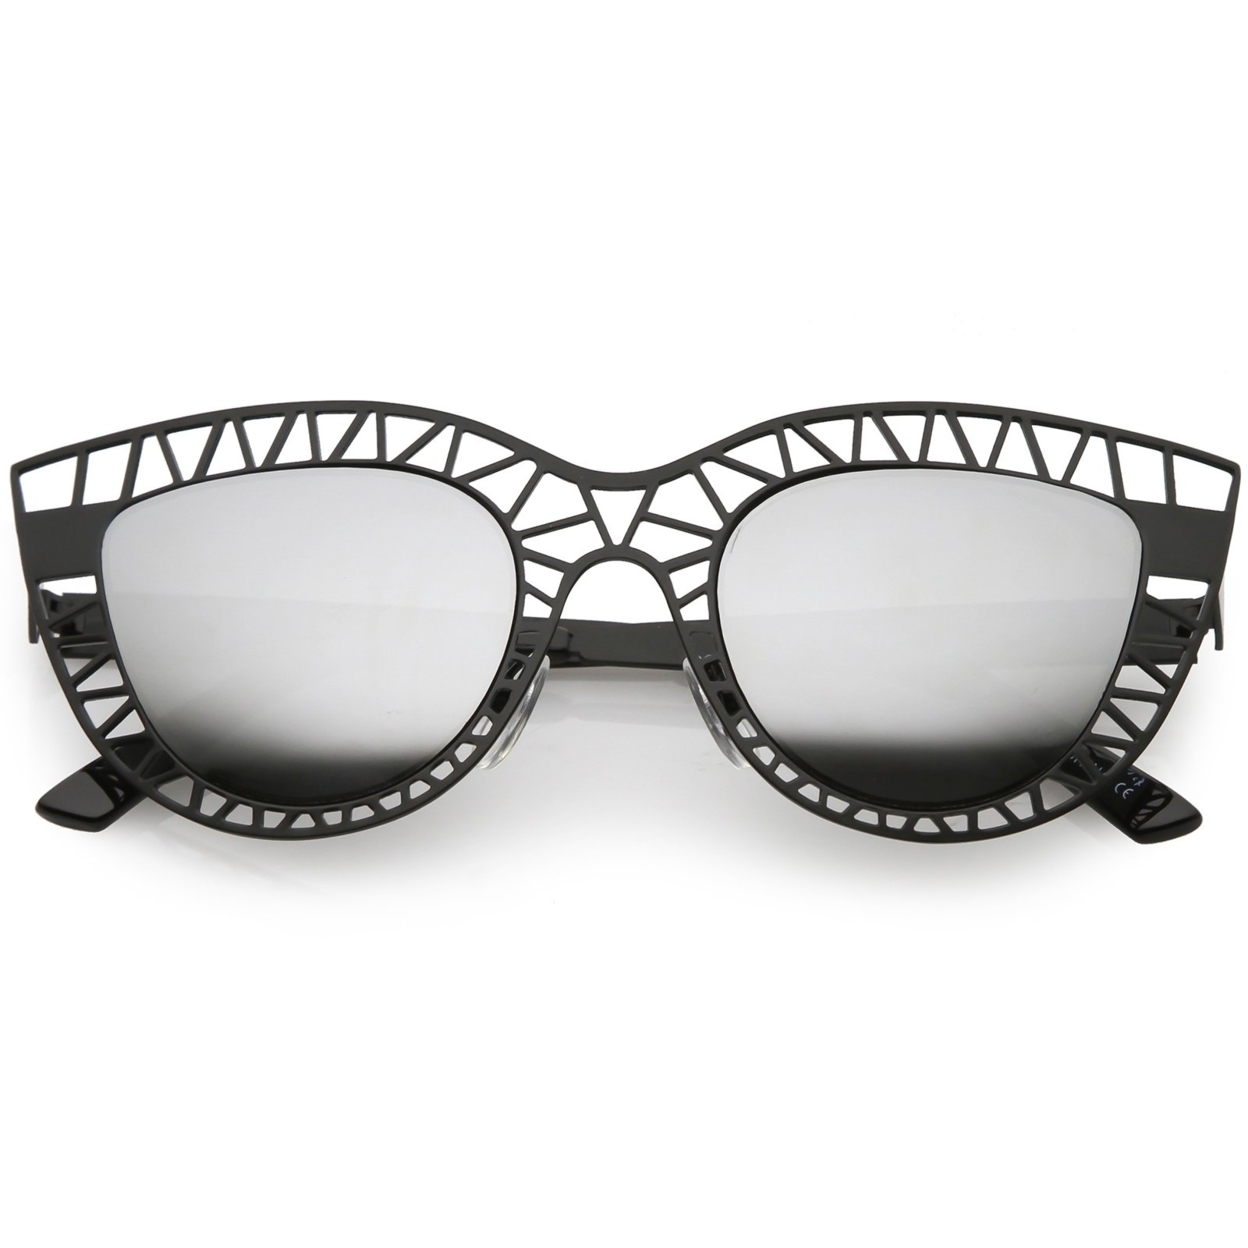 Unique Laser Cut Out Cat Eye Sunglasses With Color Mirrored Lens 48mm - Matte Silver / Green Mirror